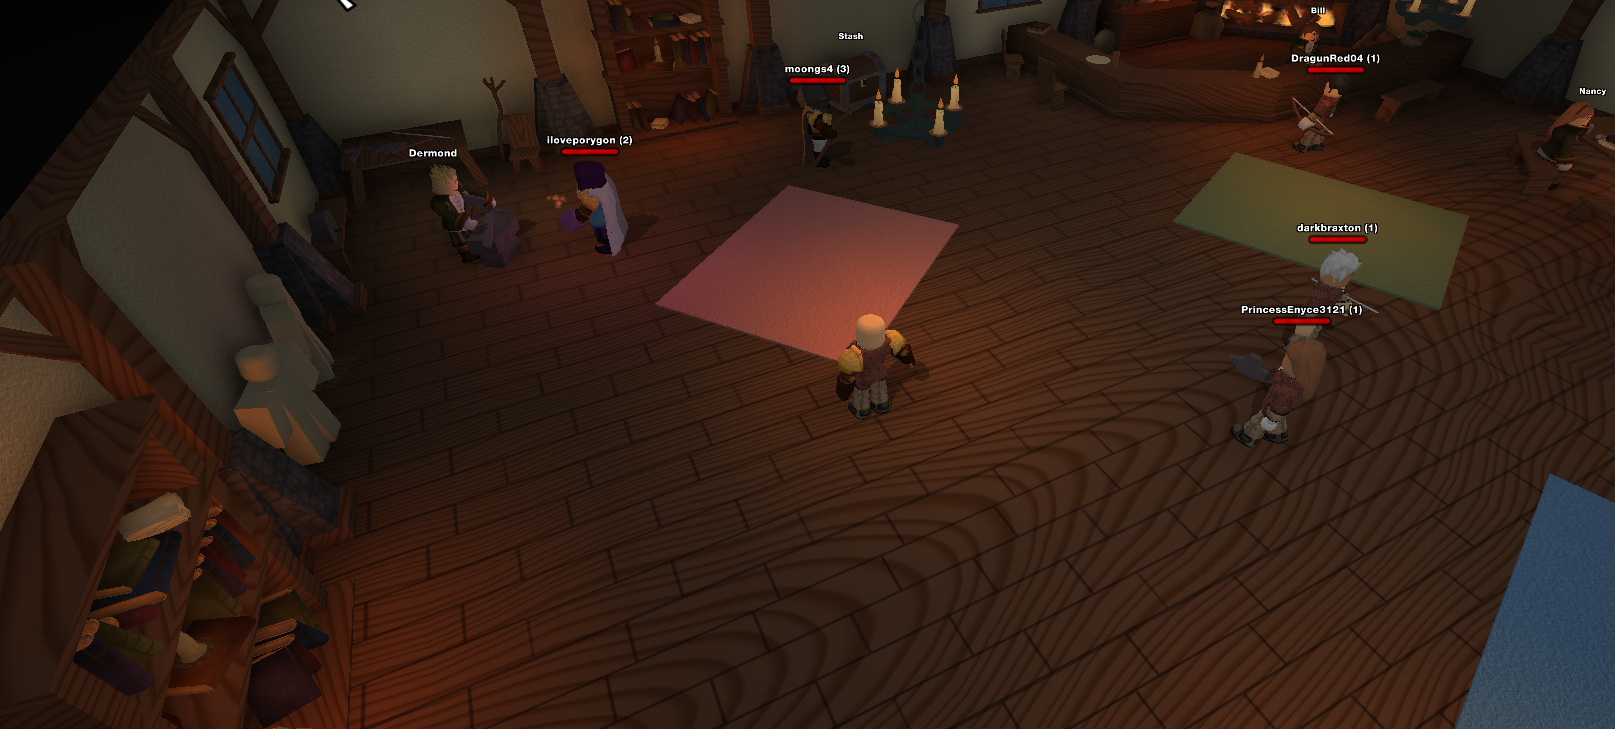 Dungeon Delver Creators Bring New Life To An Old Formula Roblox Blog - this is the lobby where you can purchase items to aid you in your quests